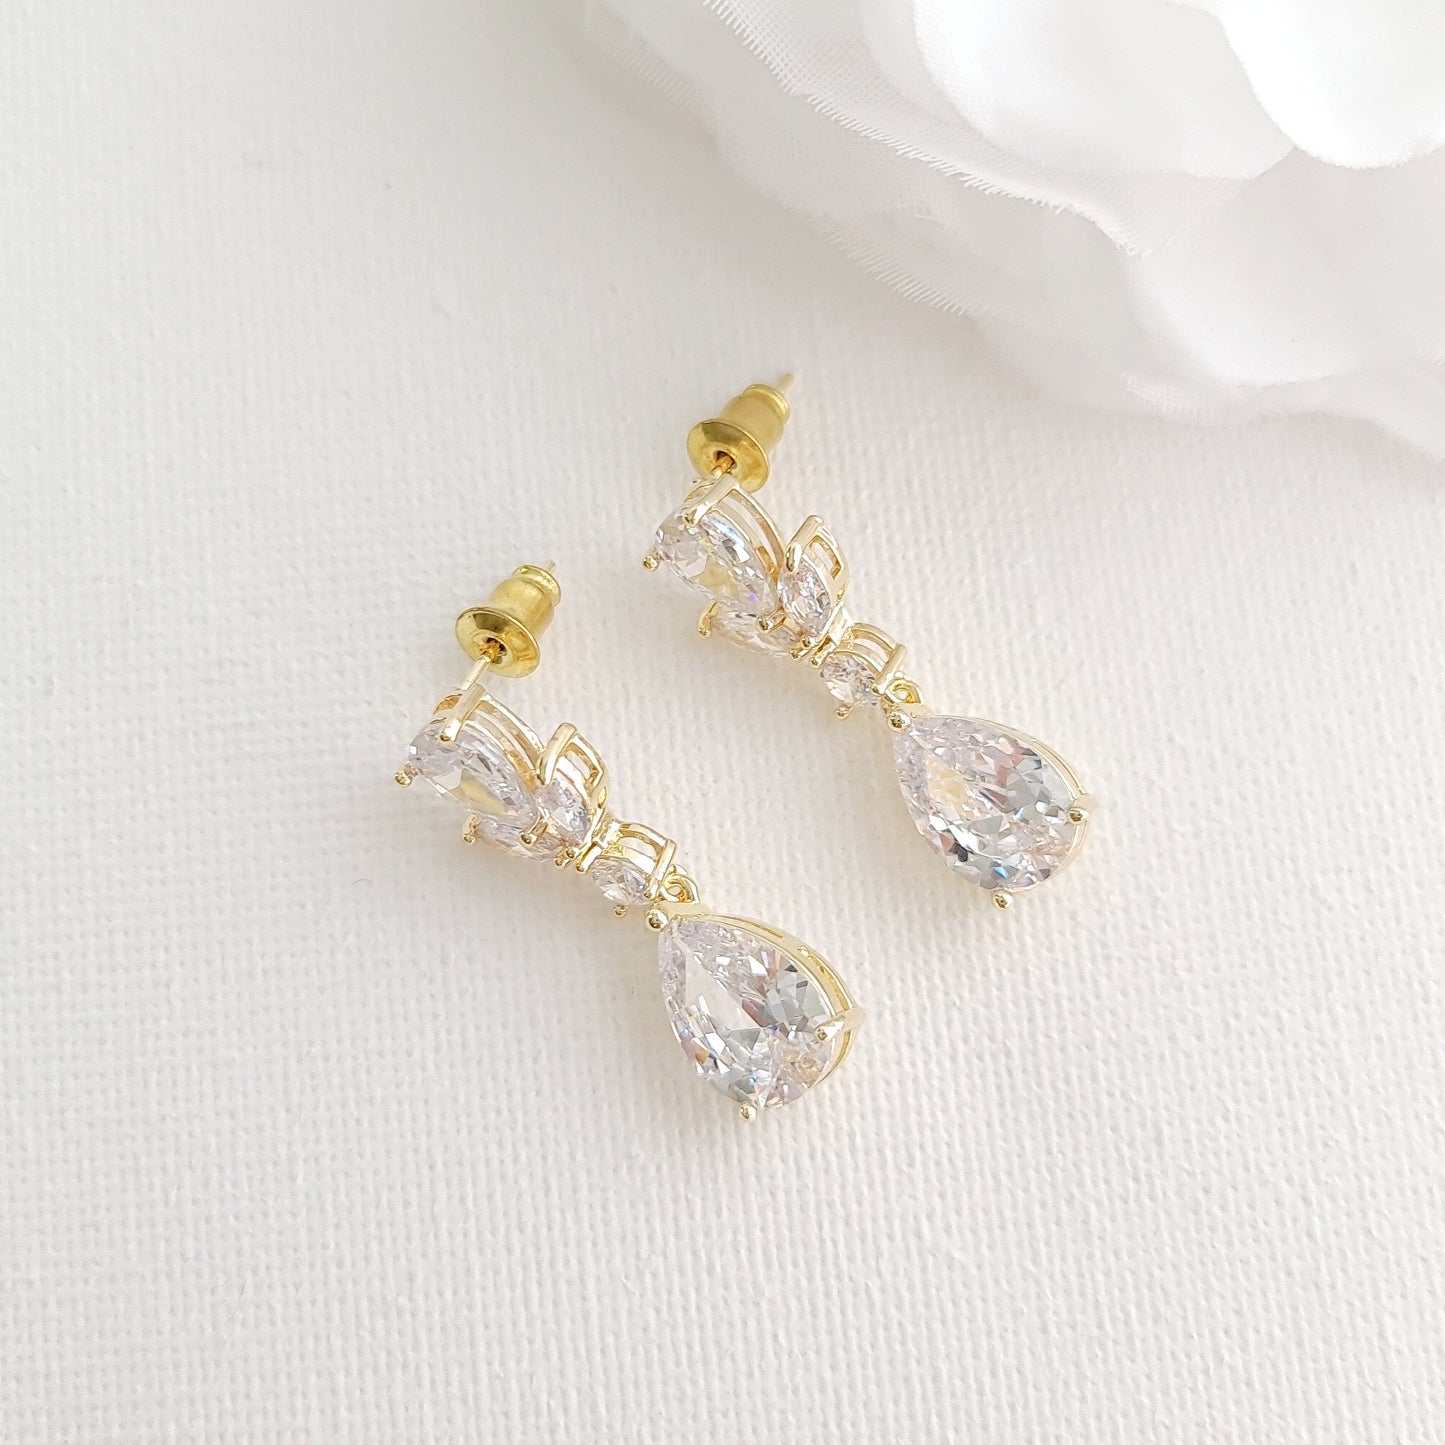 Yellow Gold Earrings Necklace and Bracelet Set for Wedding-Nicole